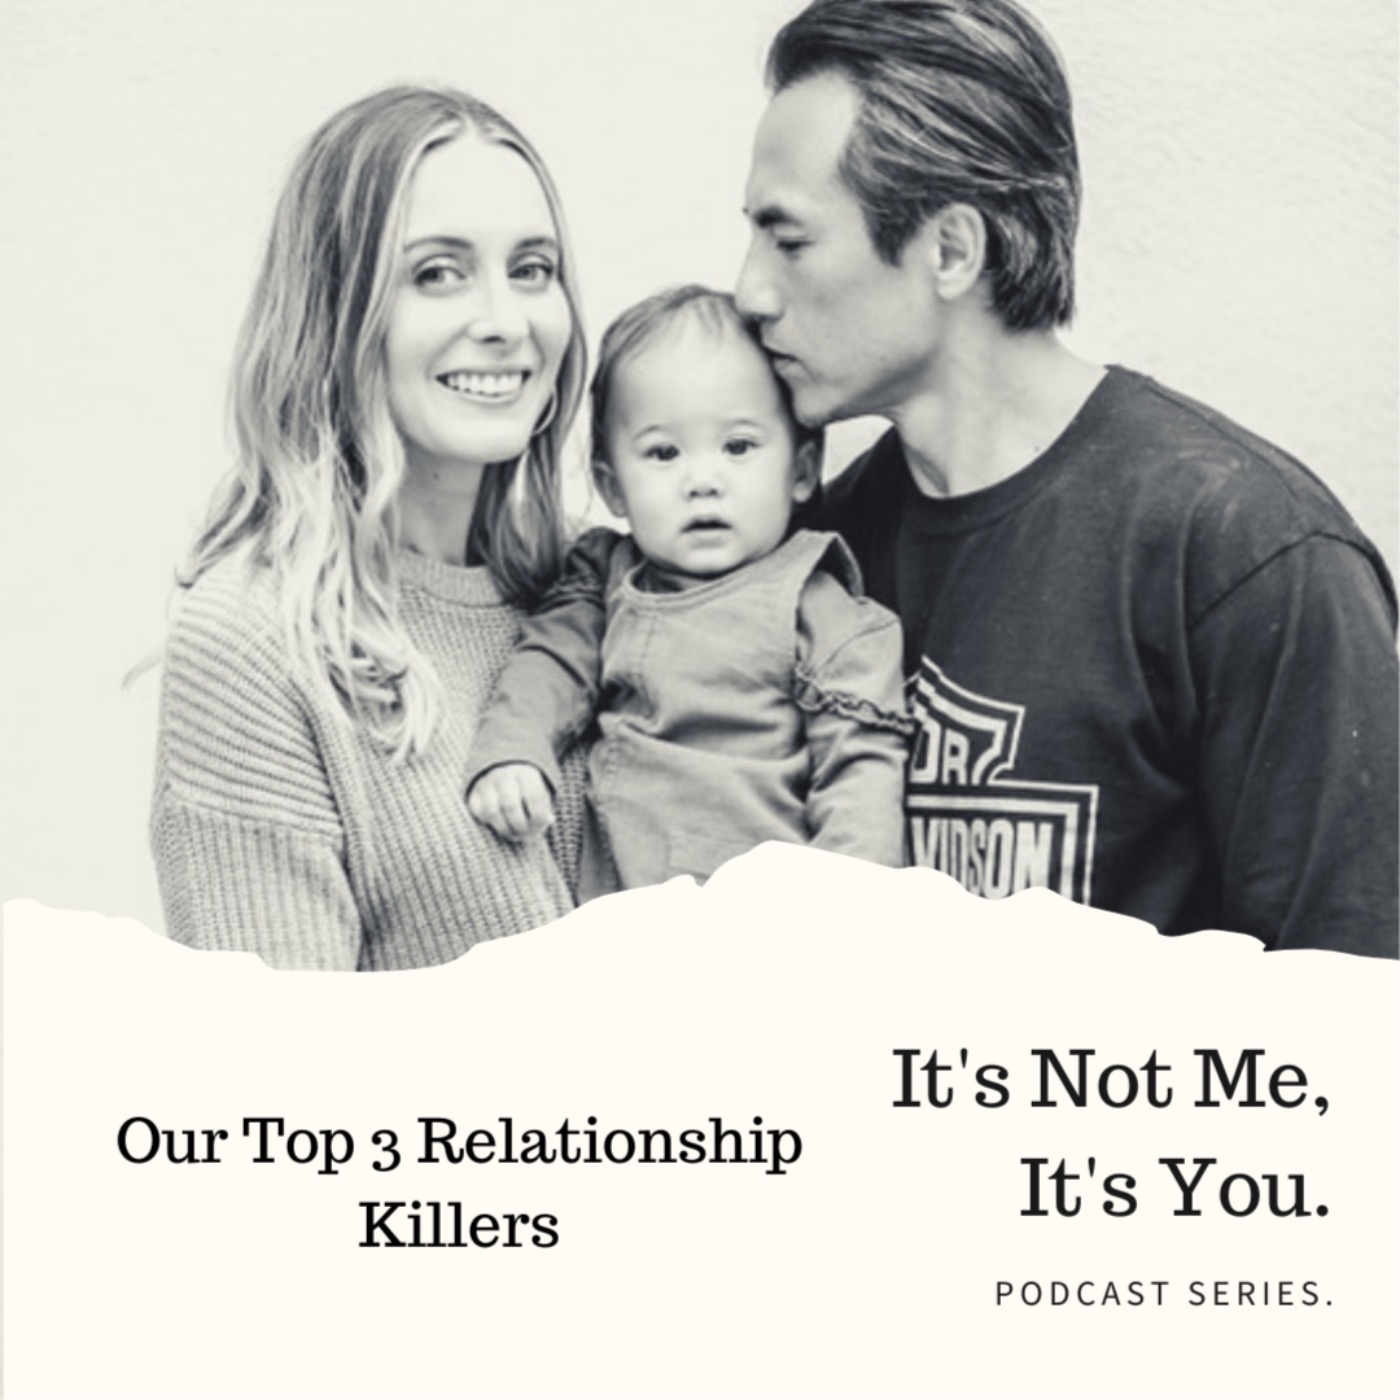 It's Not Me, It's You: Our Top 3 Relationship Killers